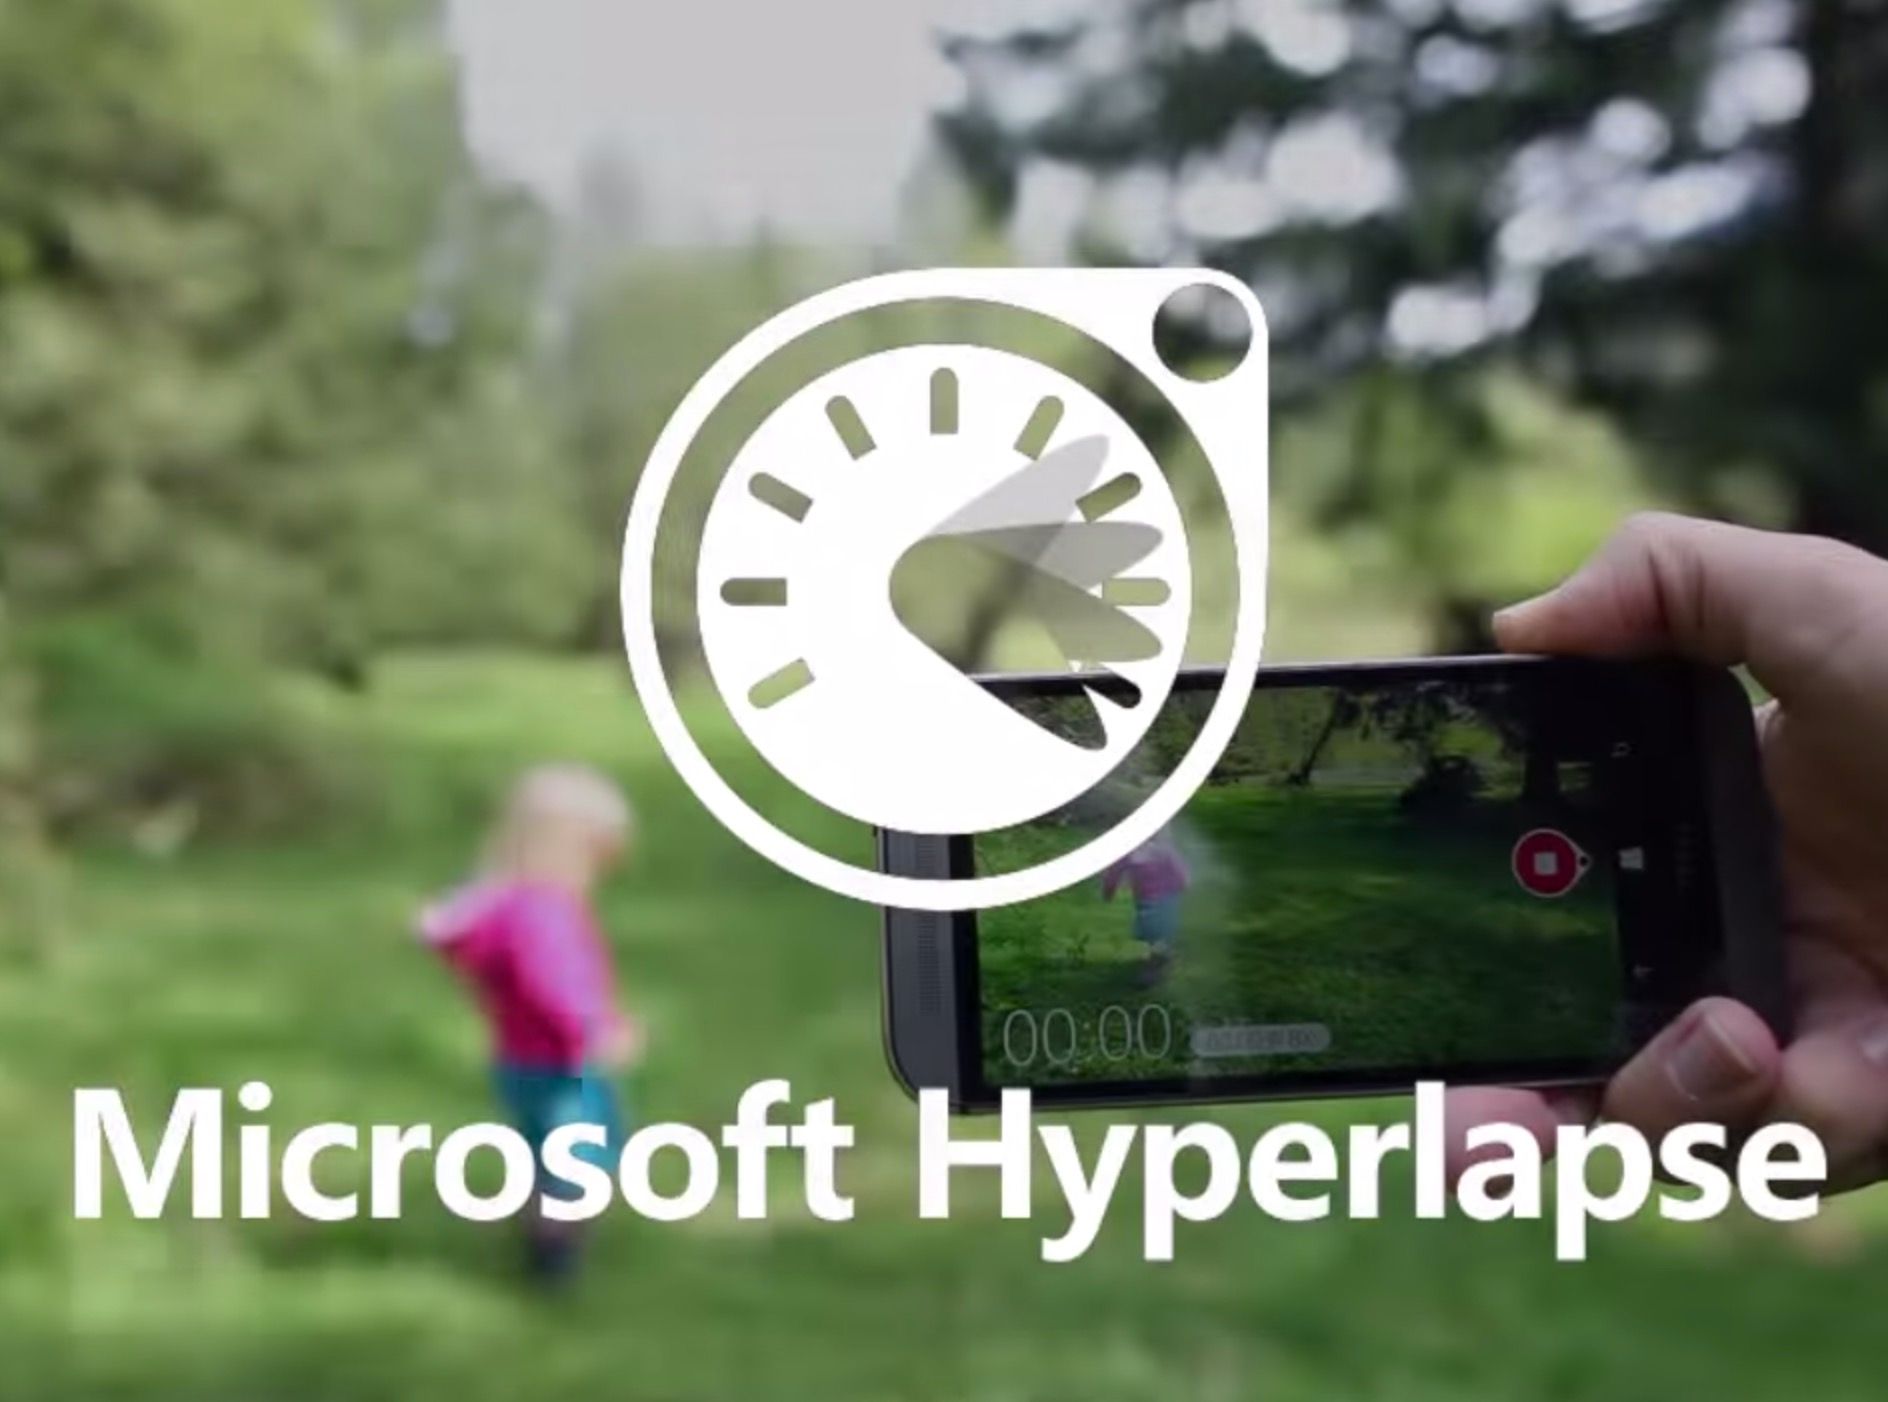 microsoft hyperlapse app can smooth out time lapse videos on windows phone and android image 1